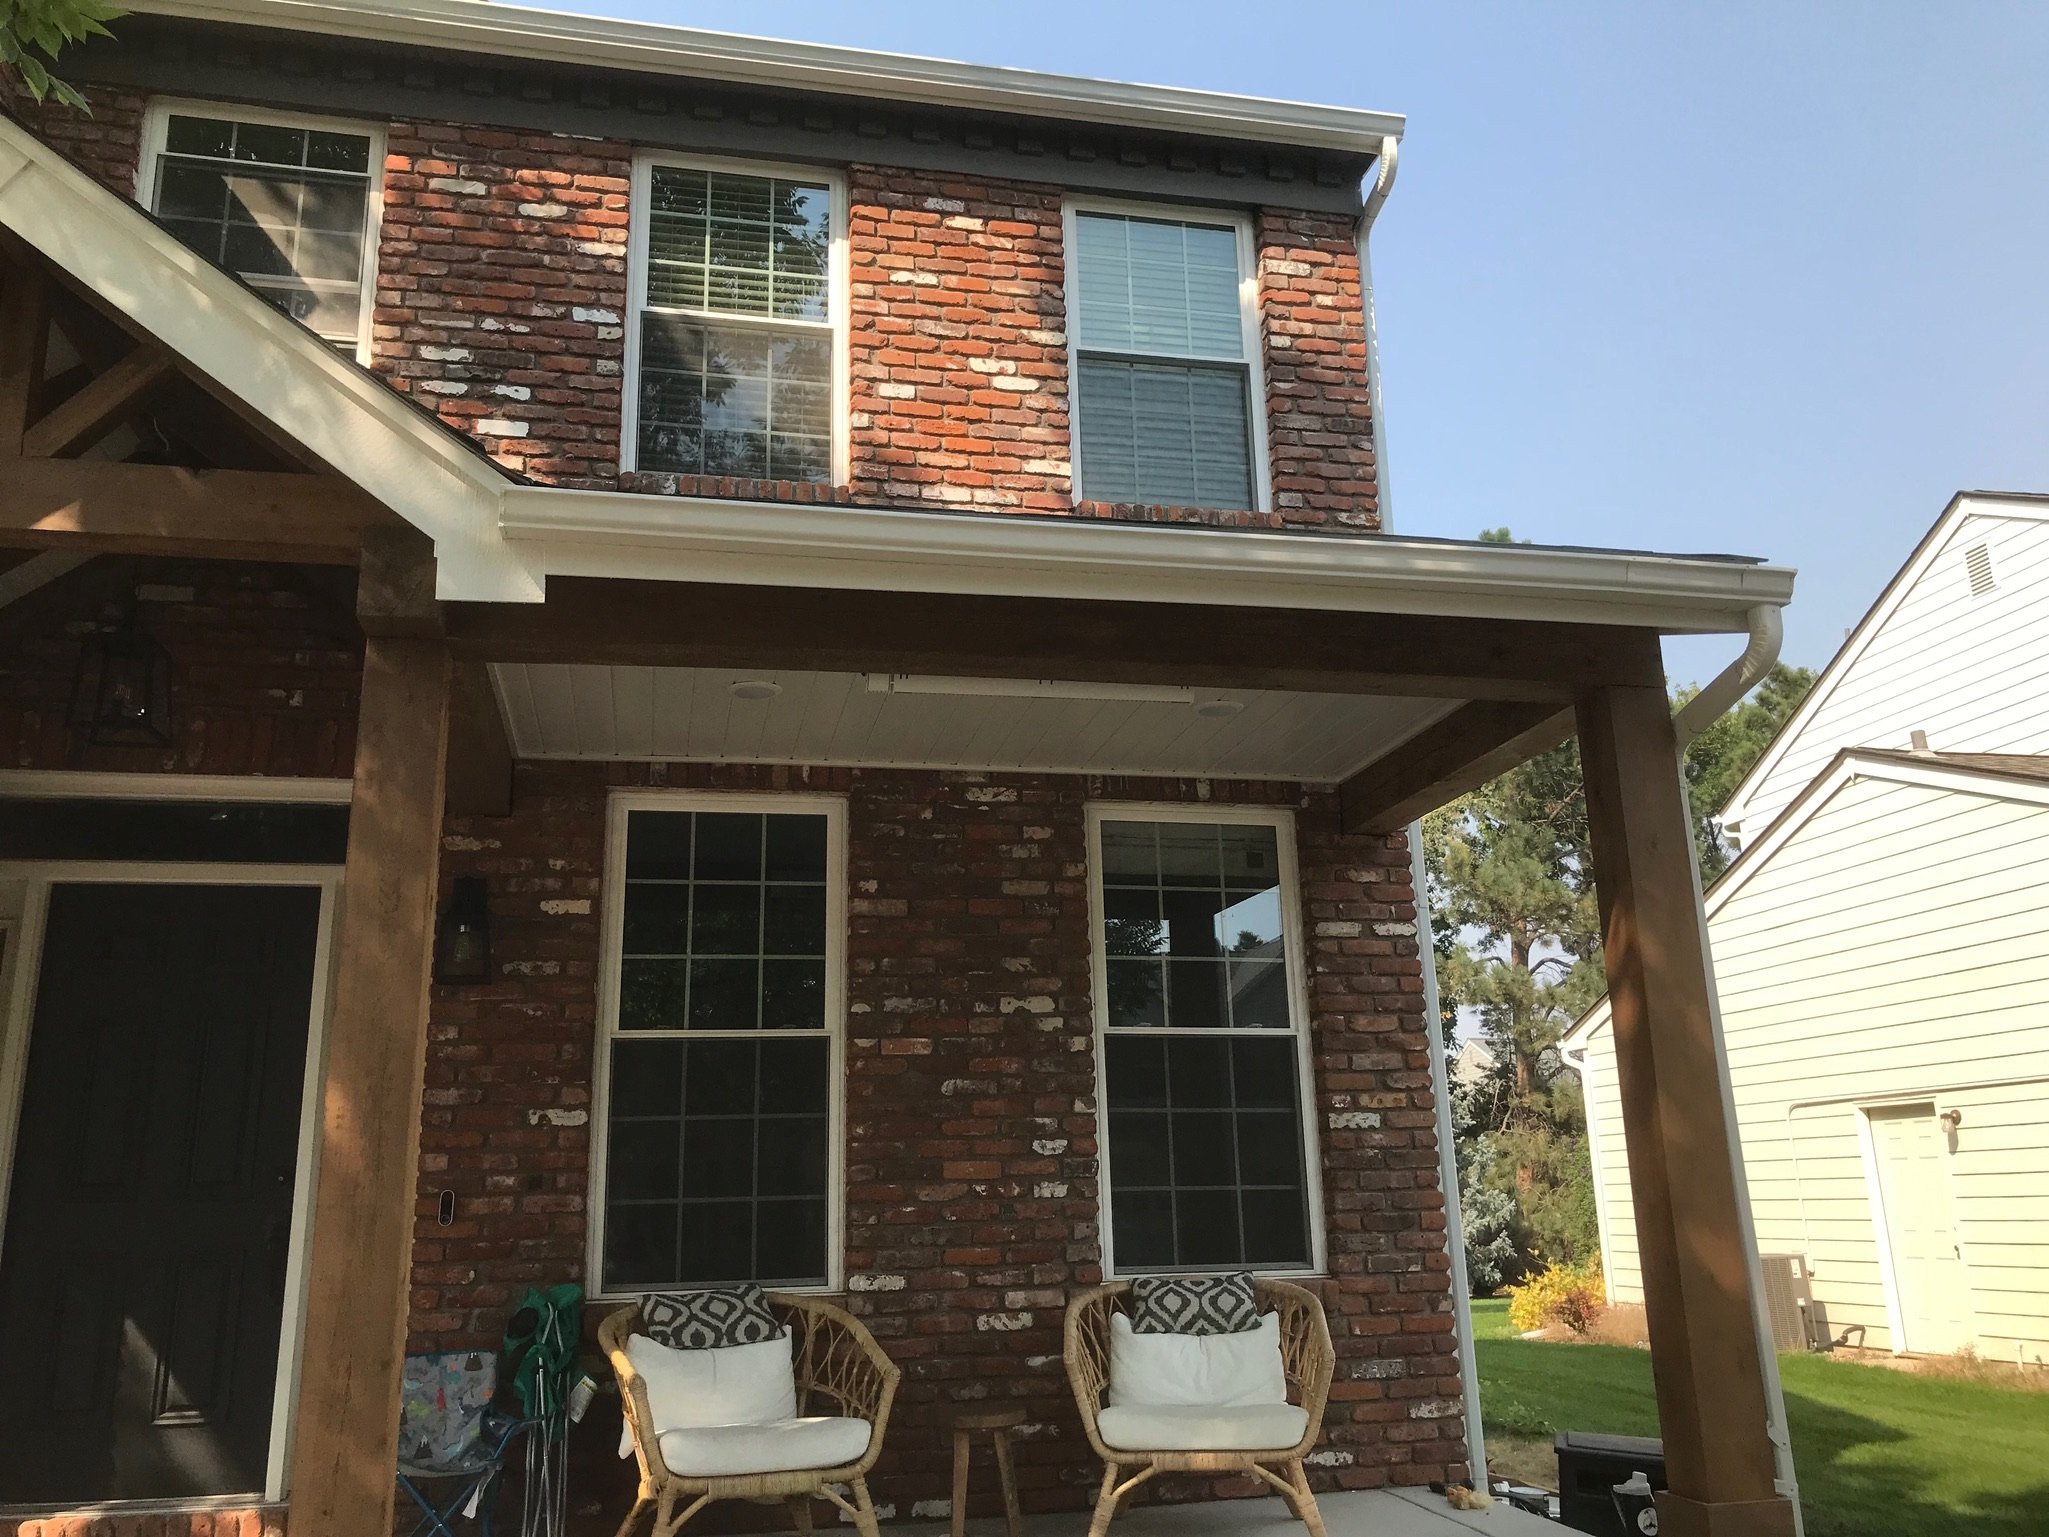 Outdoor view of a brick home with front porch and chairs